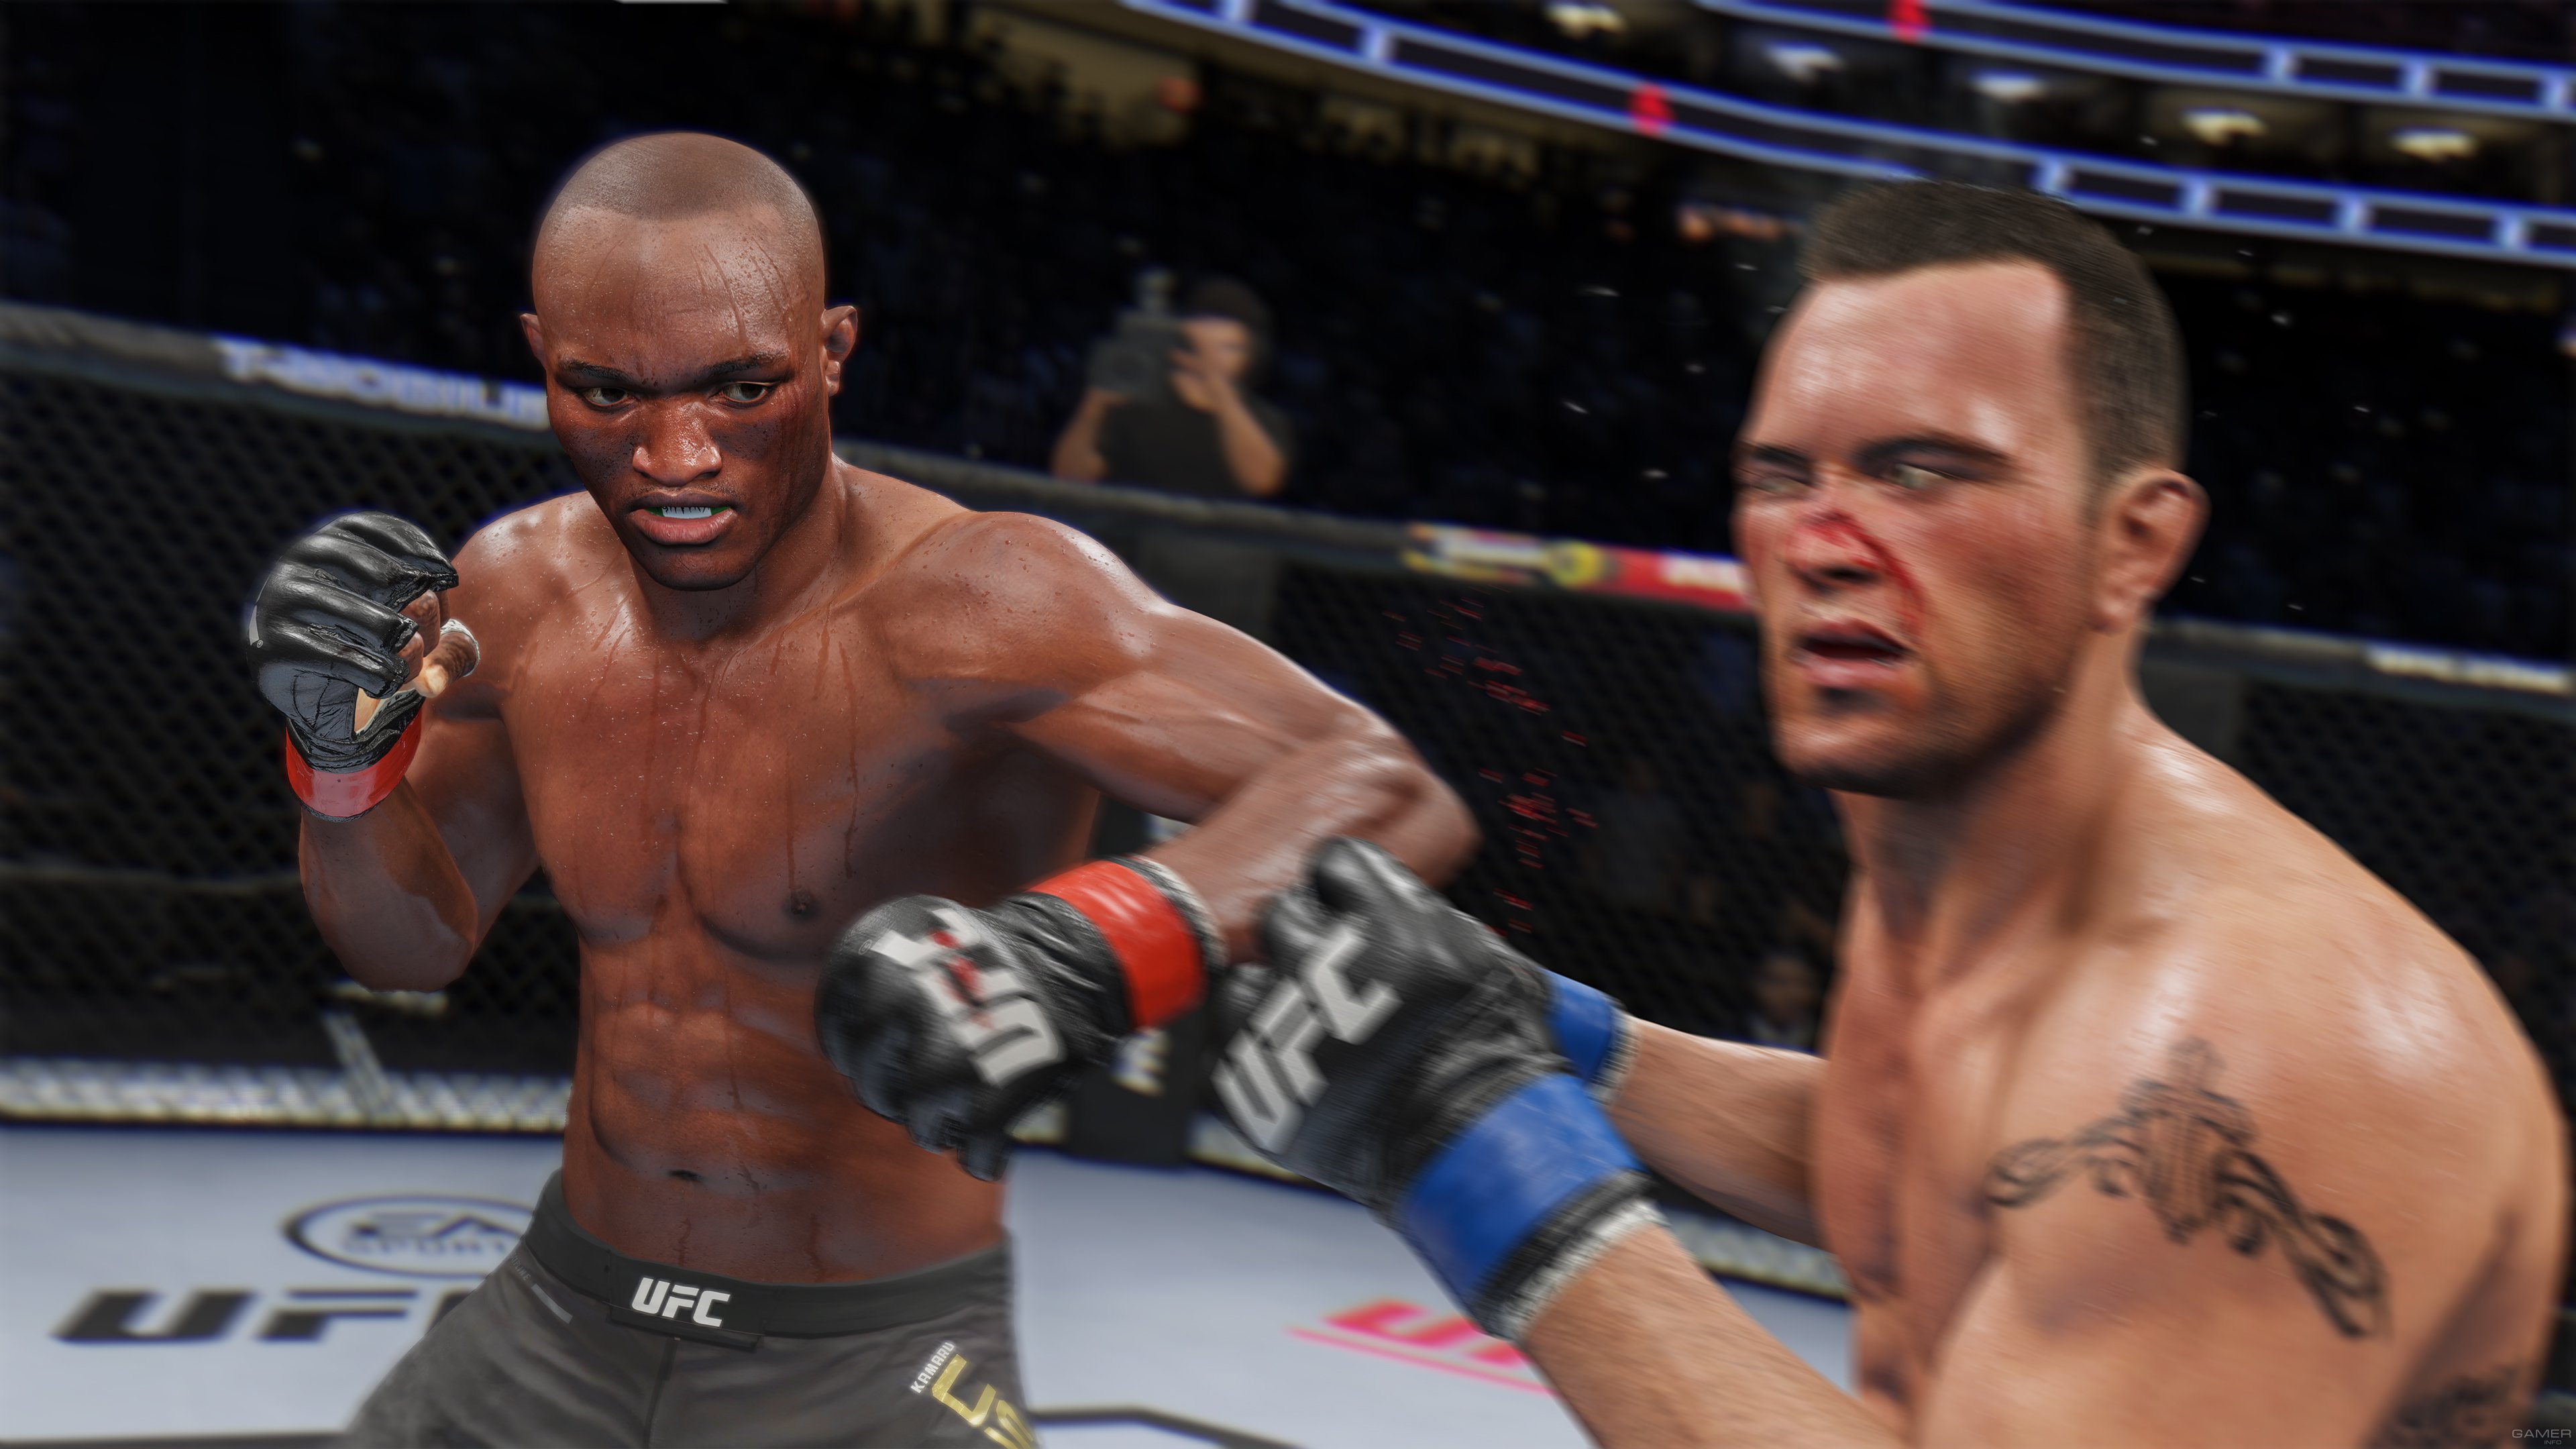 ea sports ufc 2 pc manager